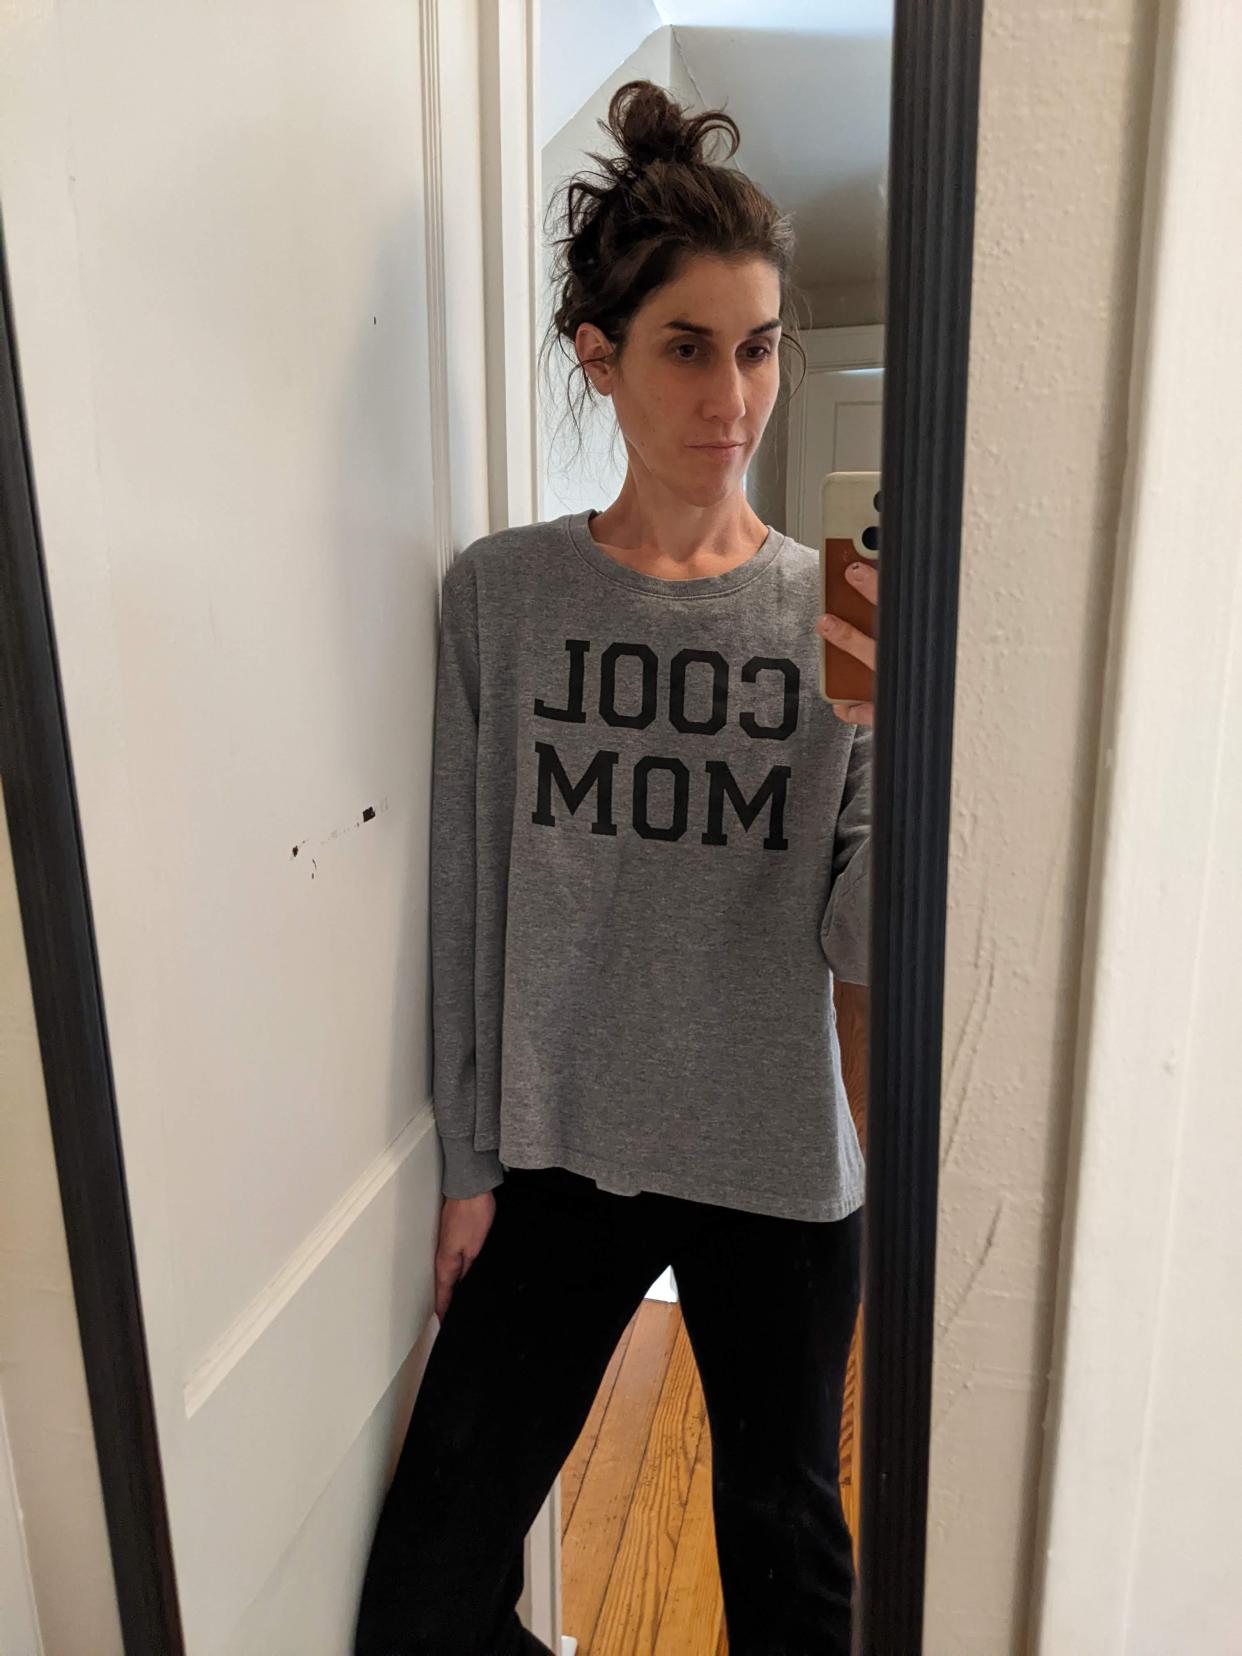 Abbey Roy scores a 'Cool Mom' shirt at the thrift store.